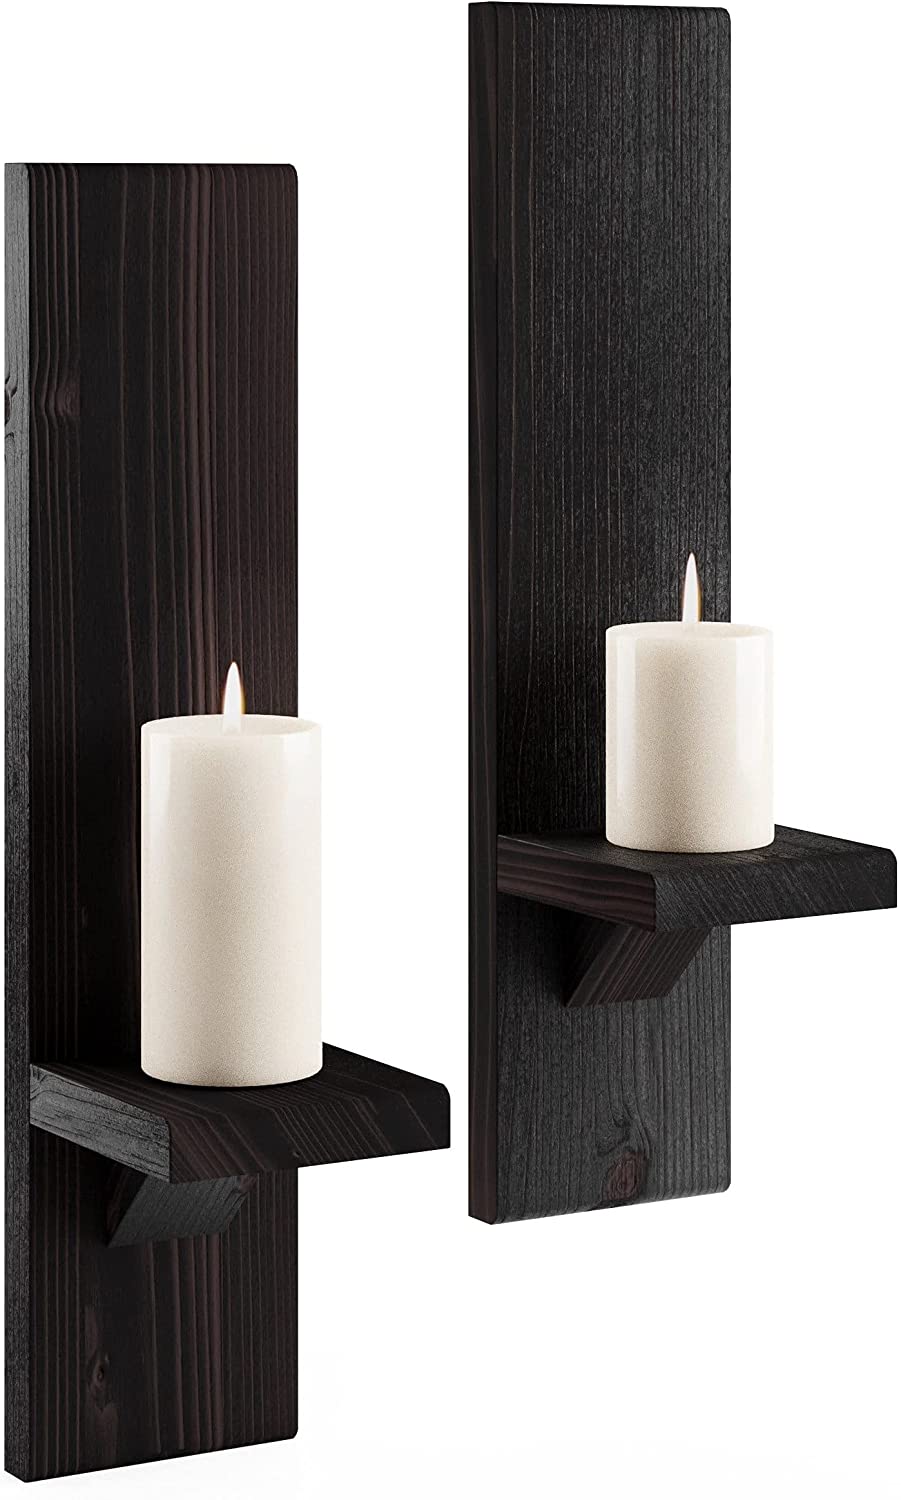 2Pcs Large Wooden Wall Mounted Candle Holder Rustic Pillar Candle Sconce